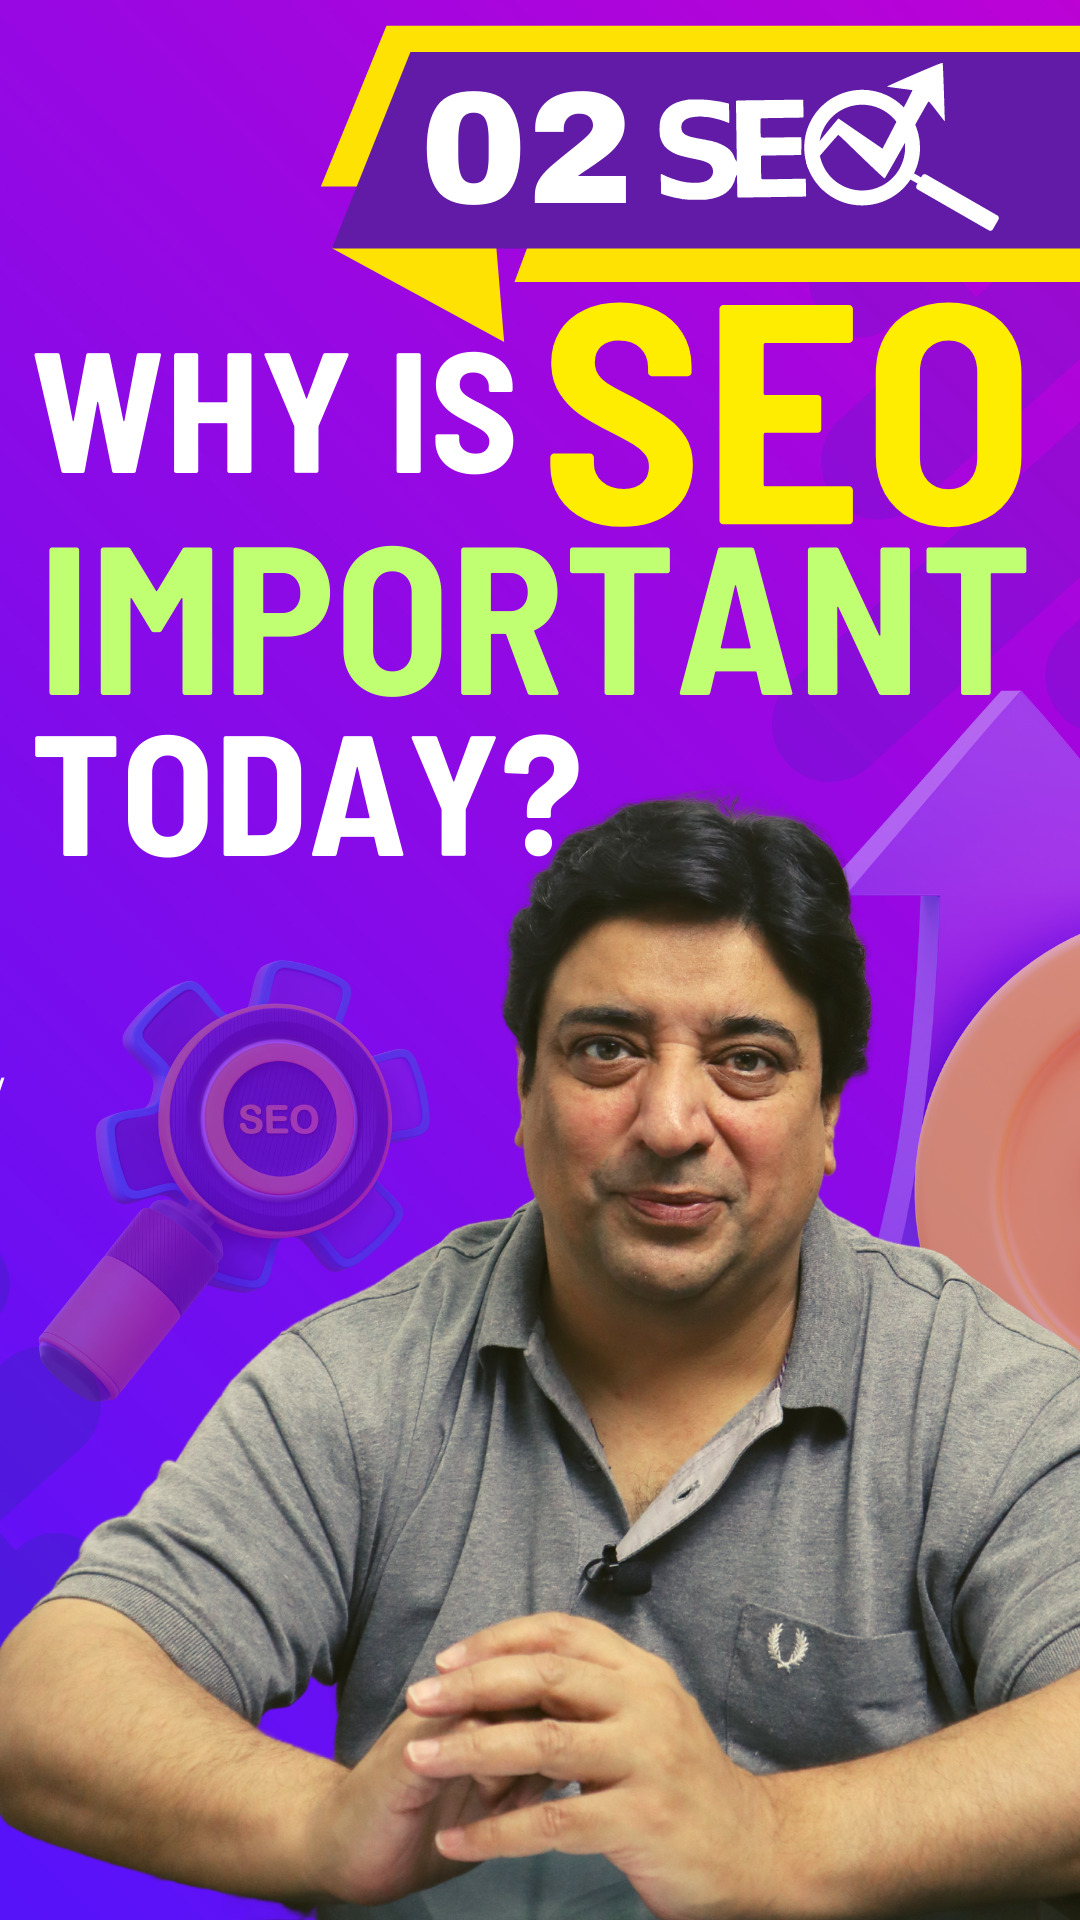 Why is SEO important today The important 3 elements of SEO